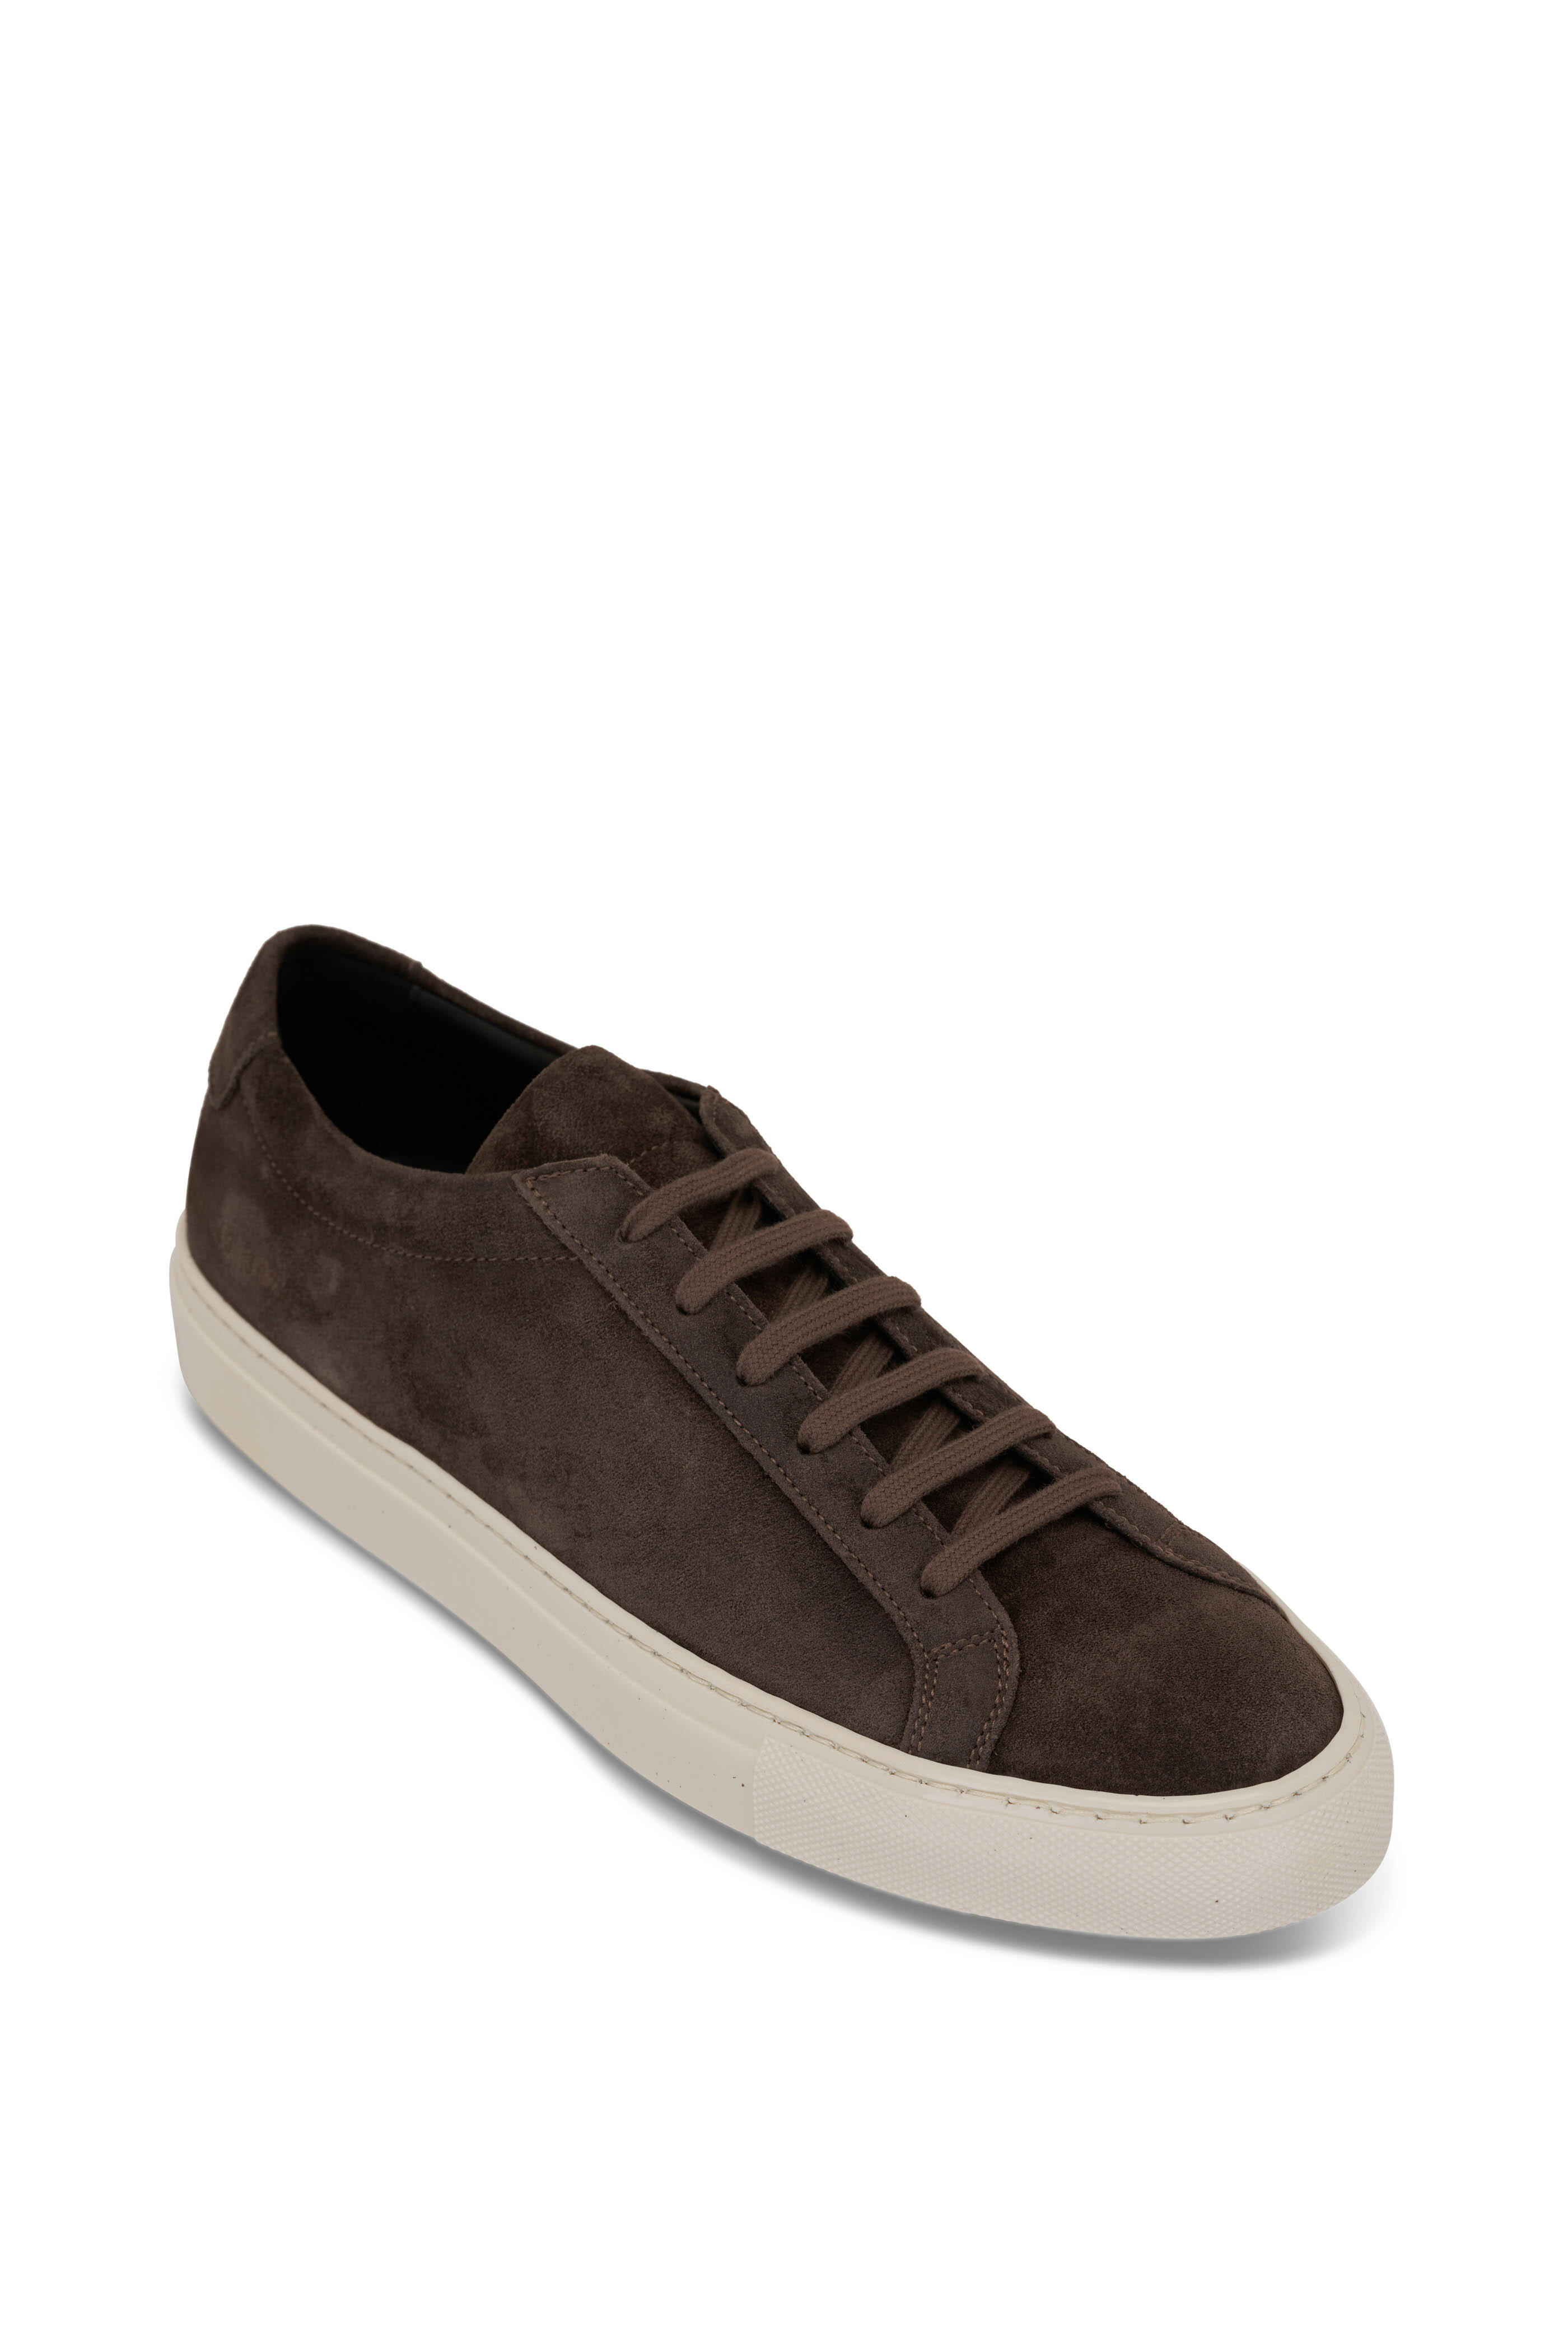 Common Projects - Achilles Waxed Gray Suede Low-Top Sneaker